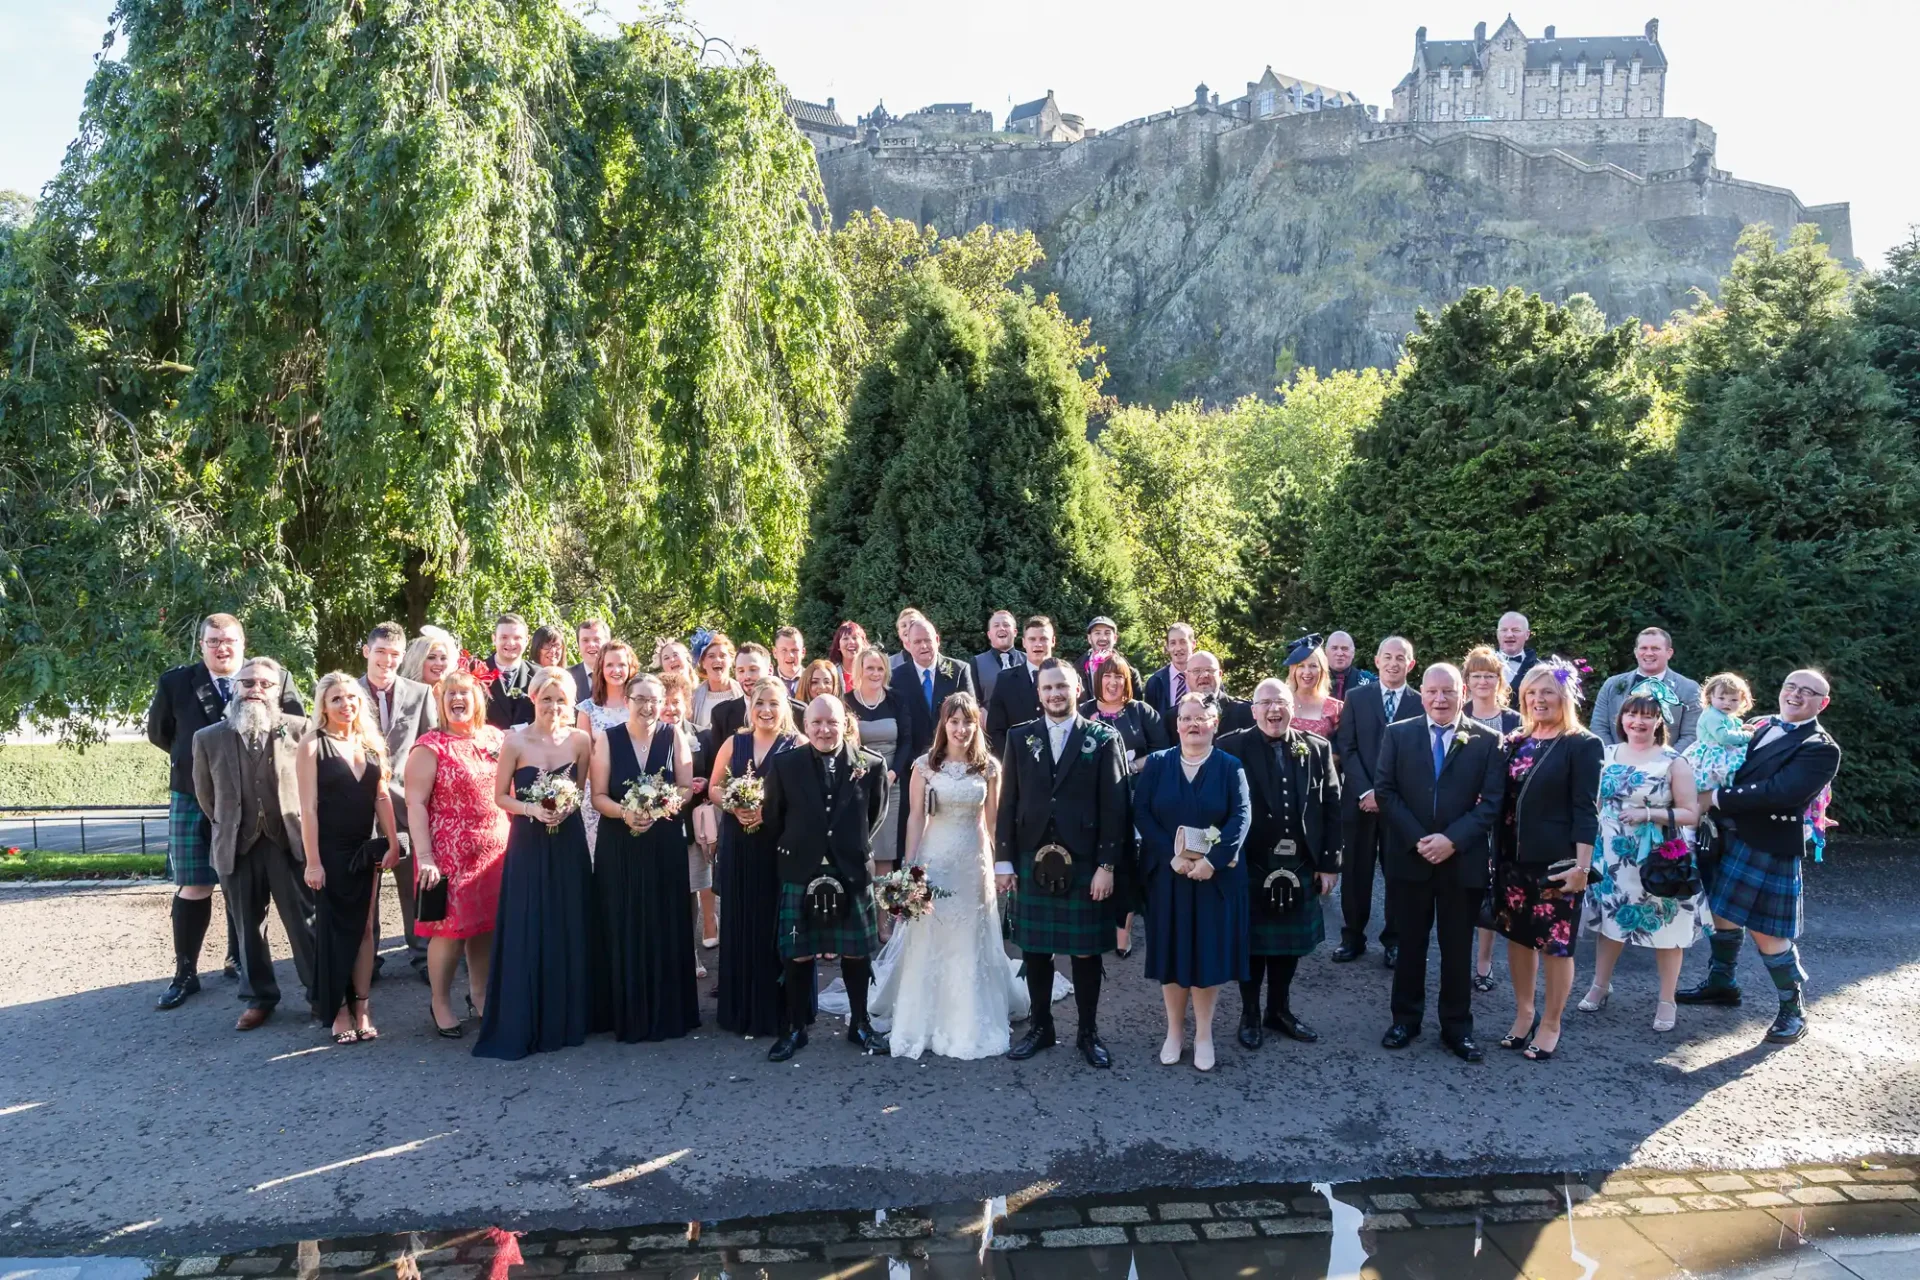 A large group of people in formal attire posing for a photo at a wedding, with a historic castle in the background on a sunny day.